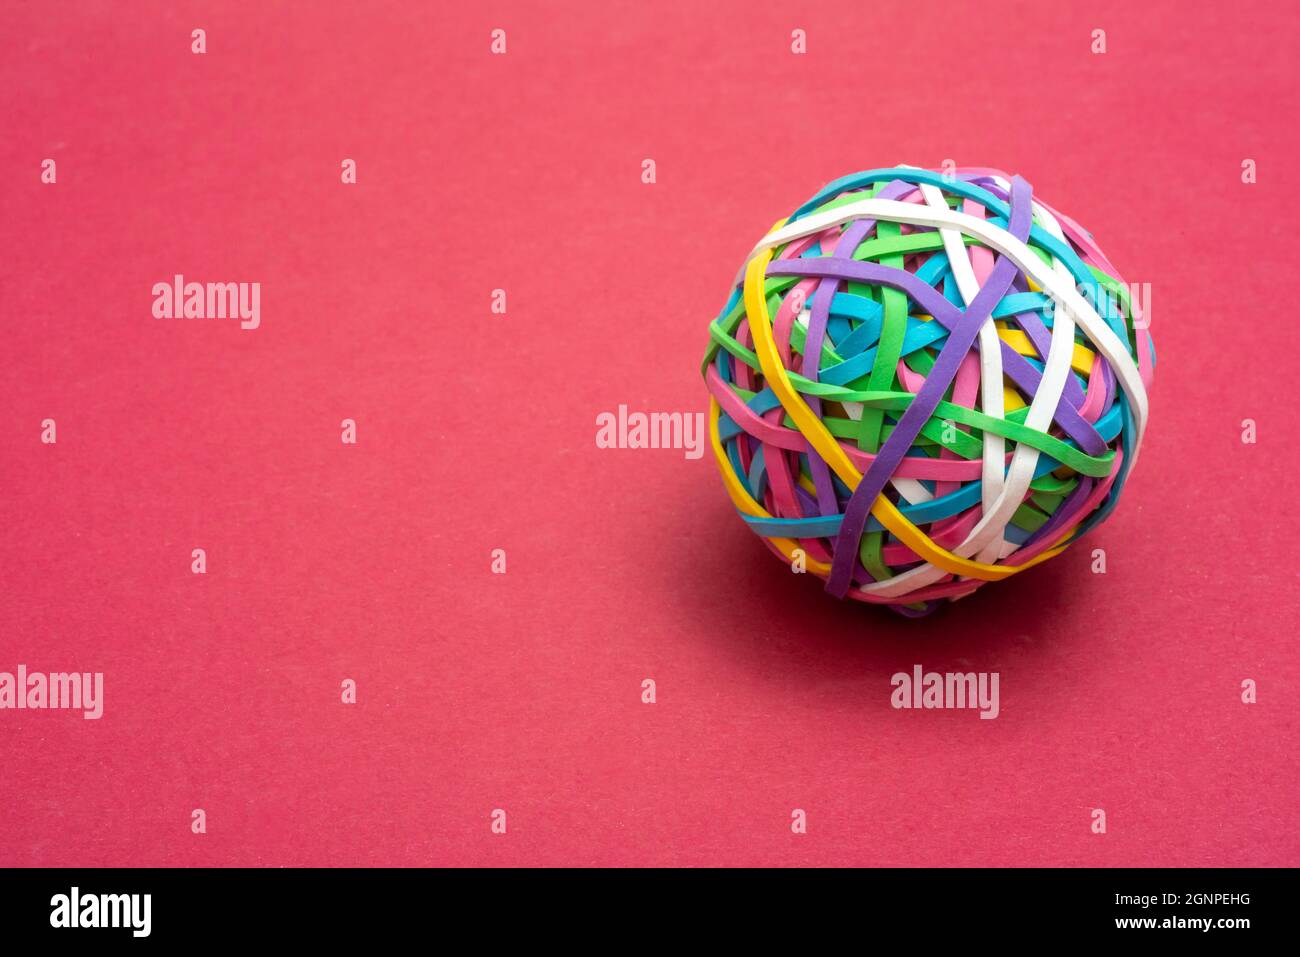 elastic or rubber bands in a ball on a pink background ,office ssupply or concept of flexibility . Stock Photo